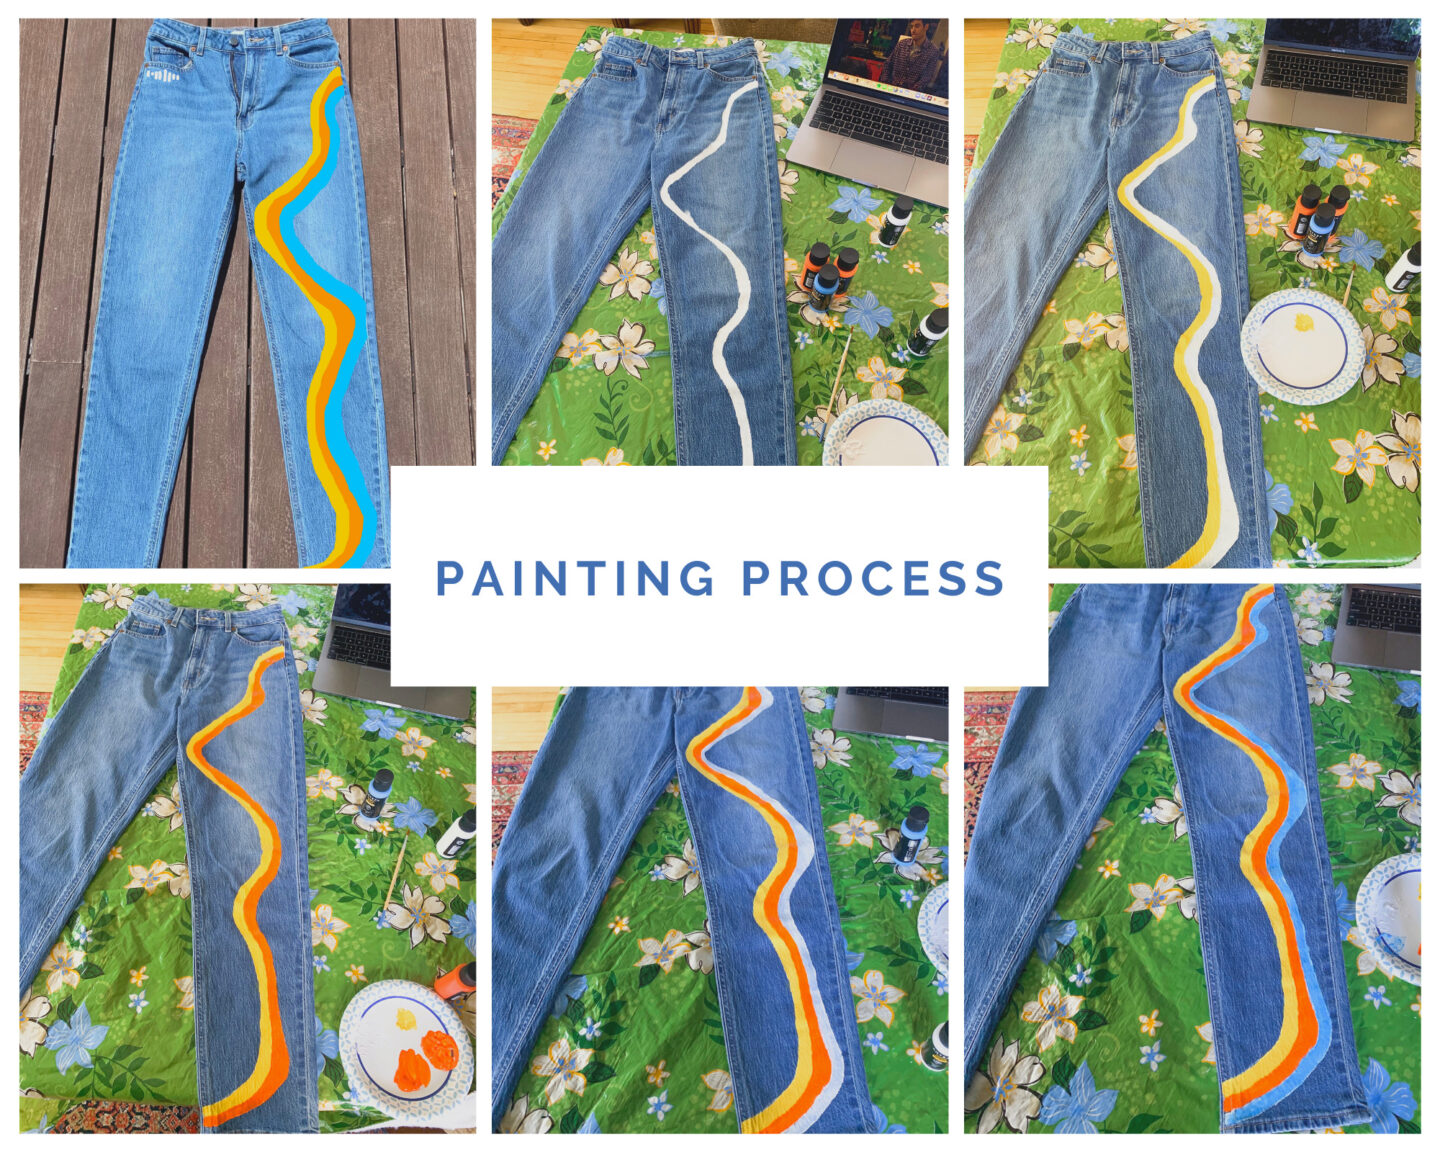 How to Paint on Jeans